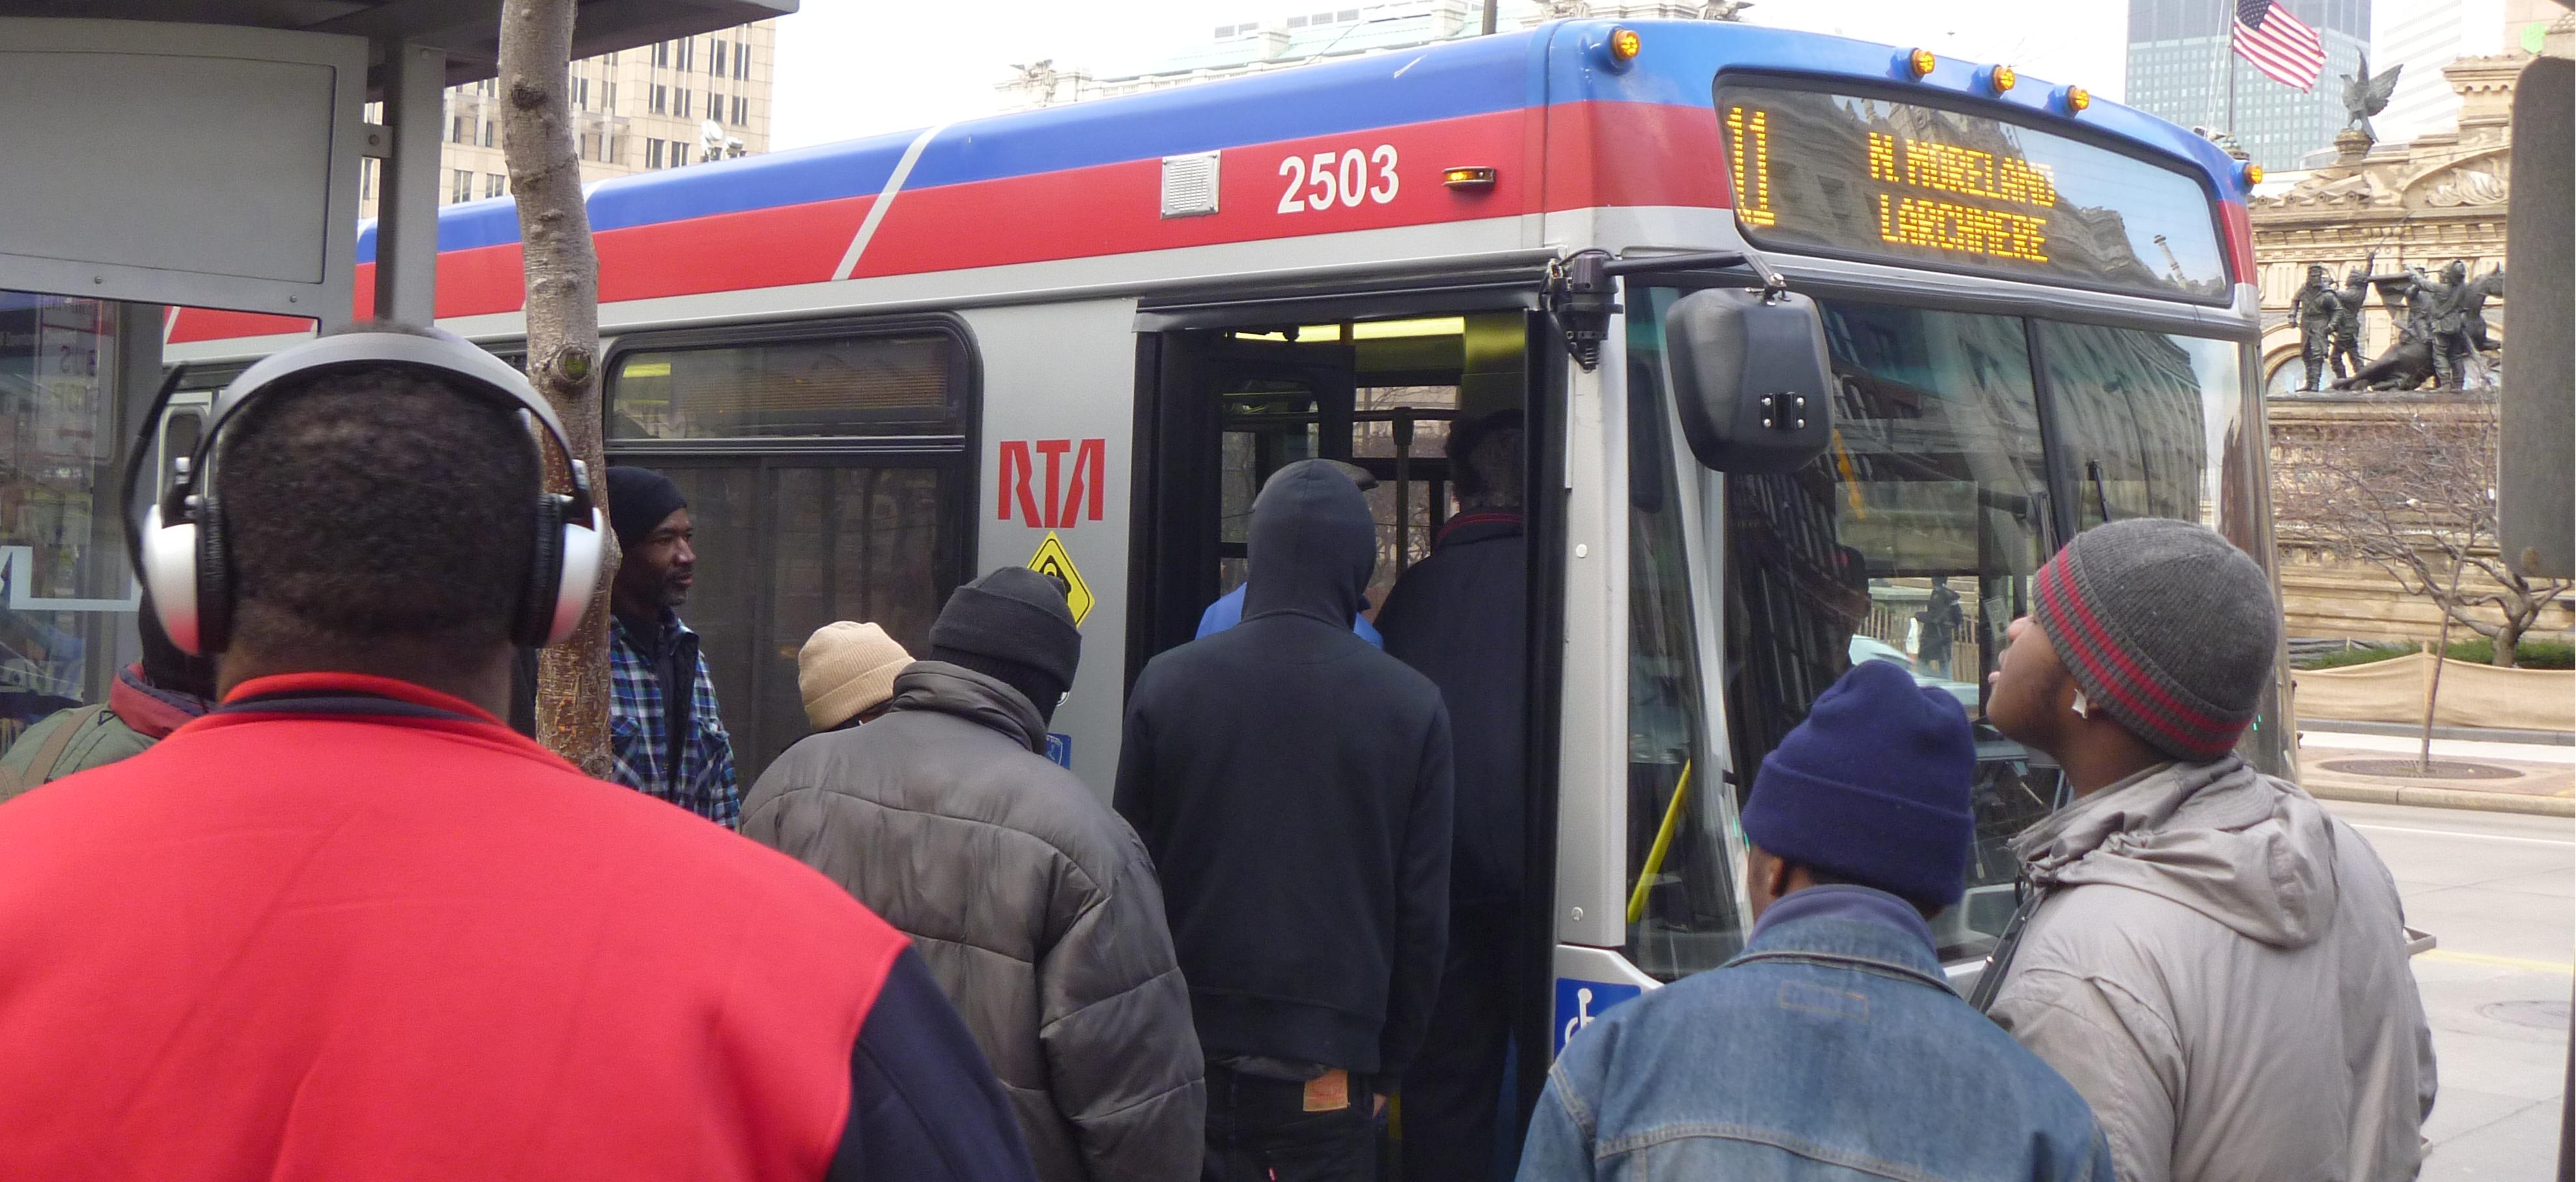  RTA provided 2 million more rides in 2012 over 2011